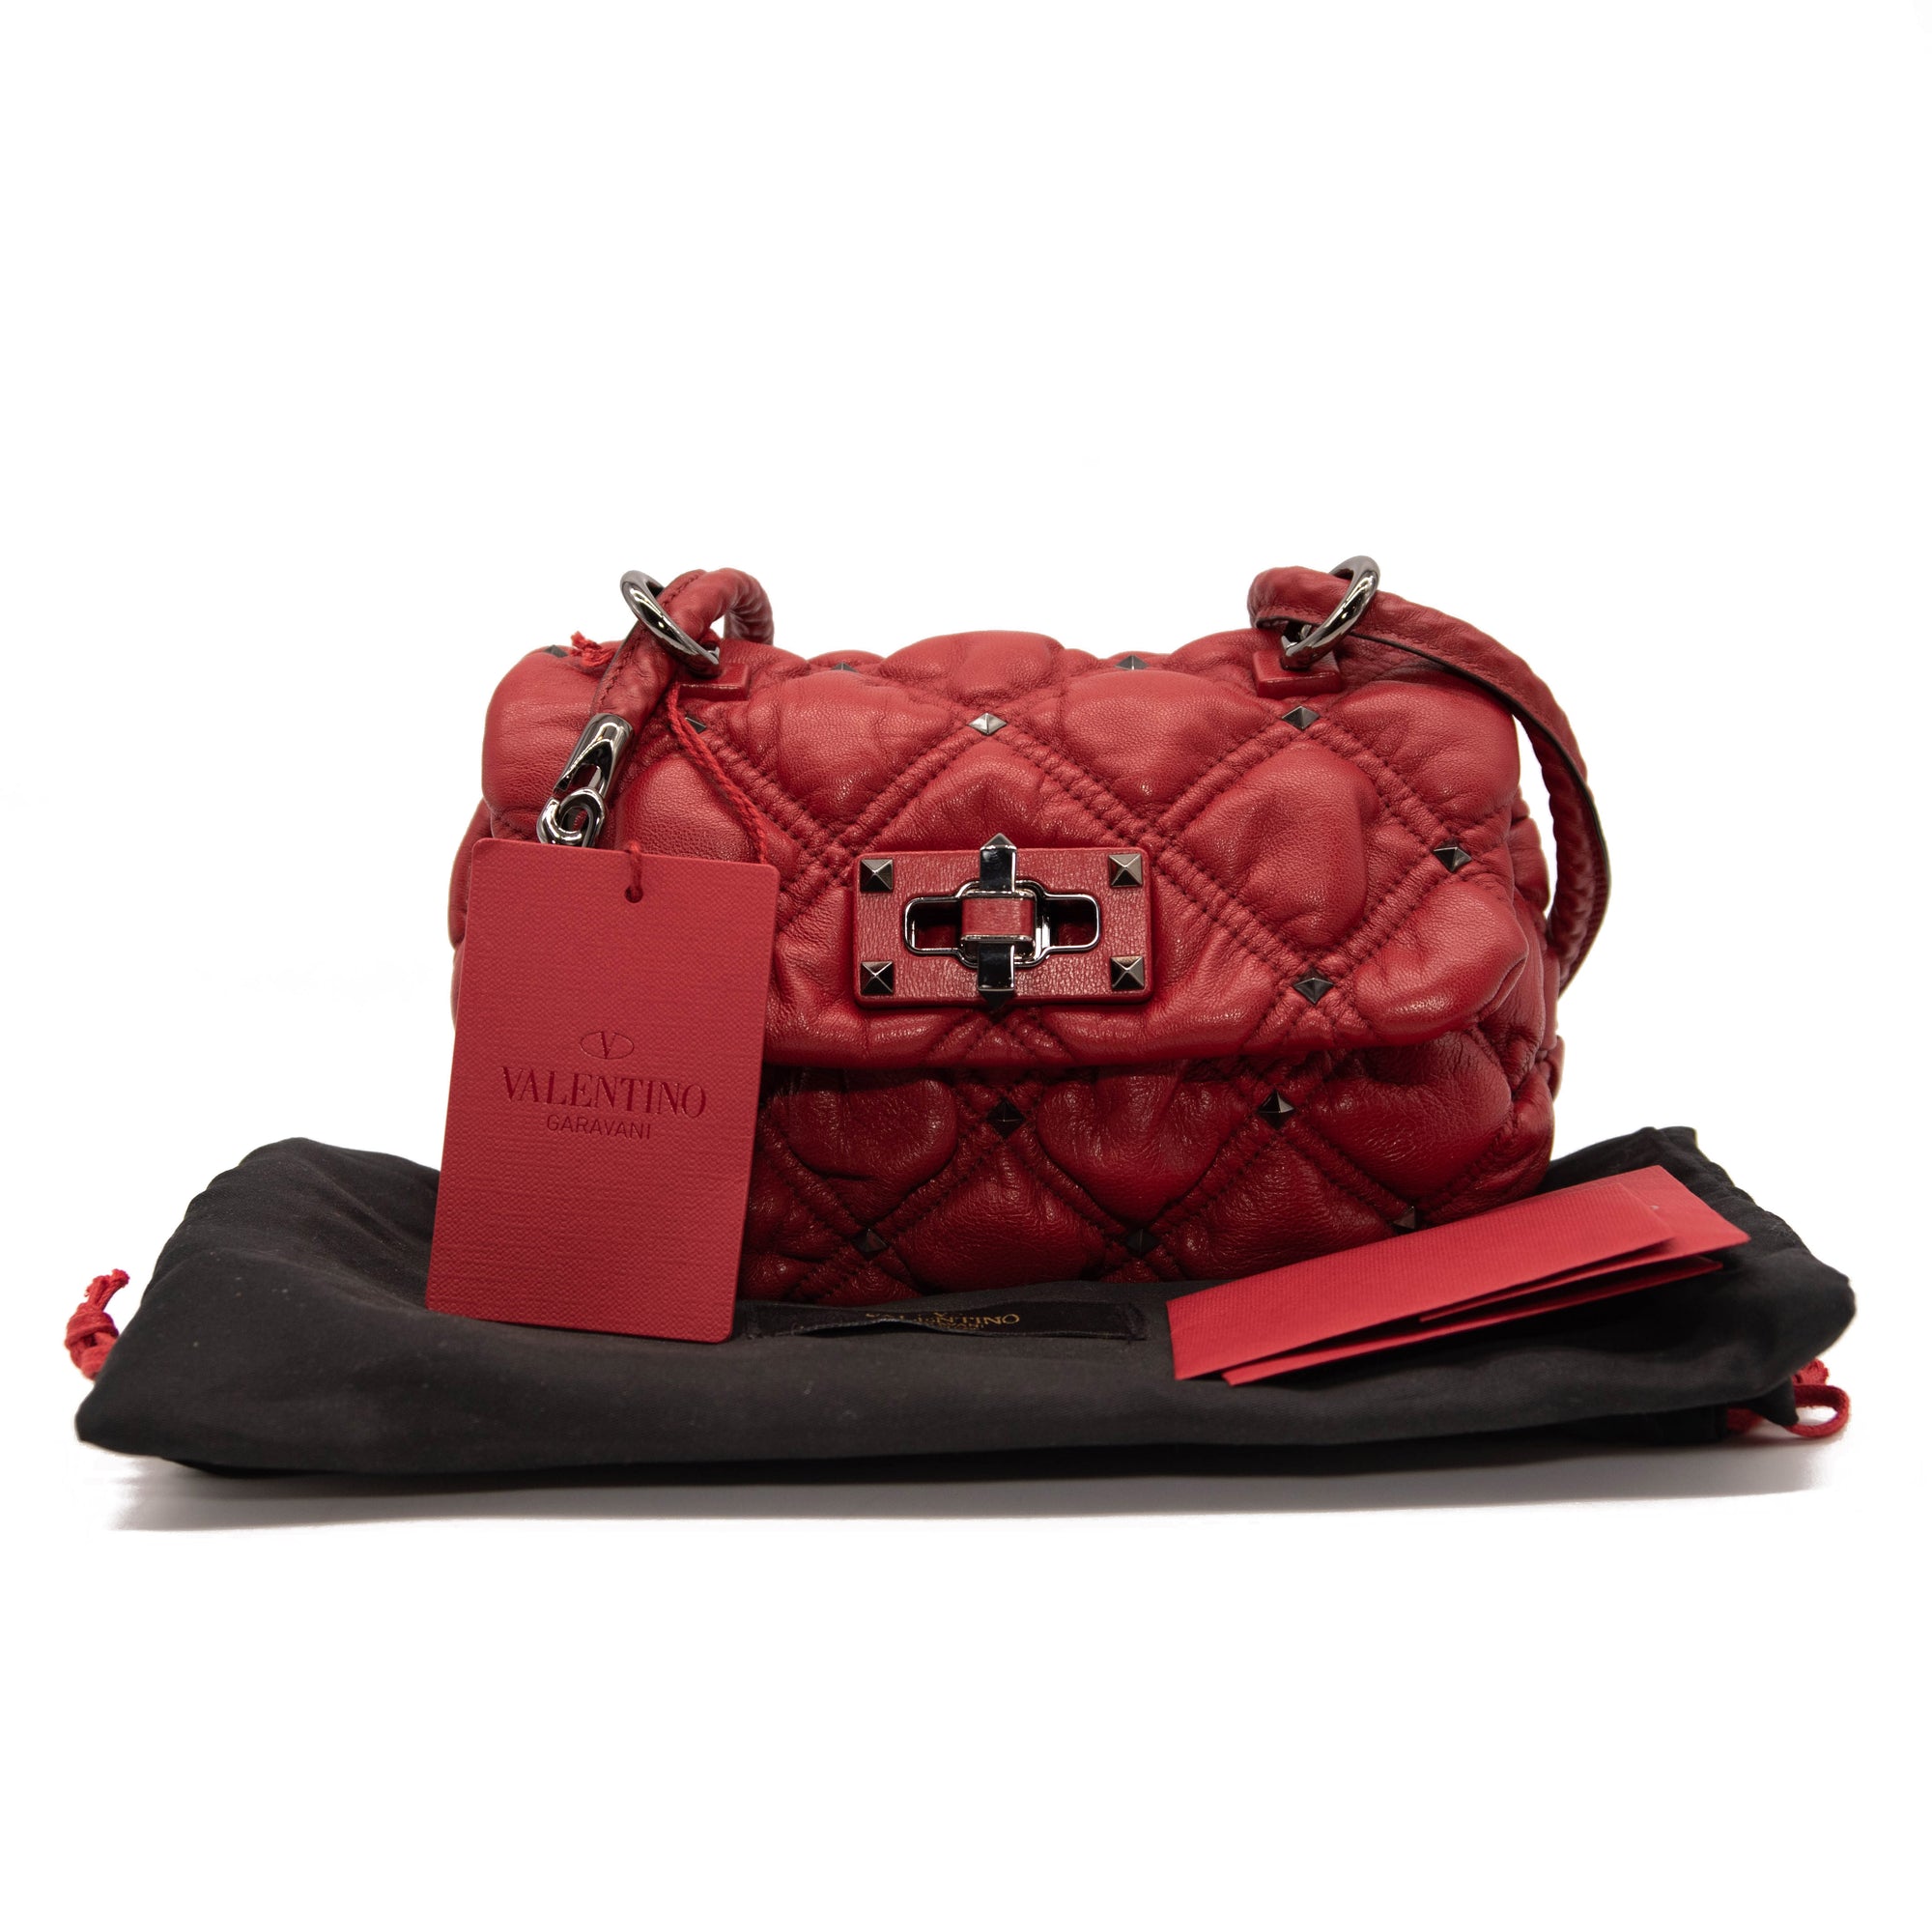 Valentino Red Quilted Leather Spikeme Shoulder Bag at FORZIERI